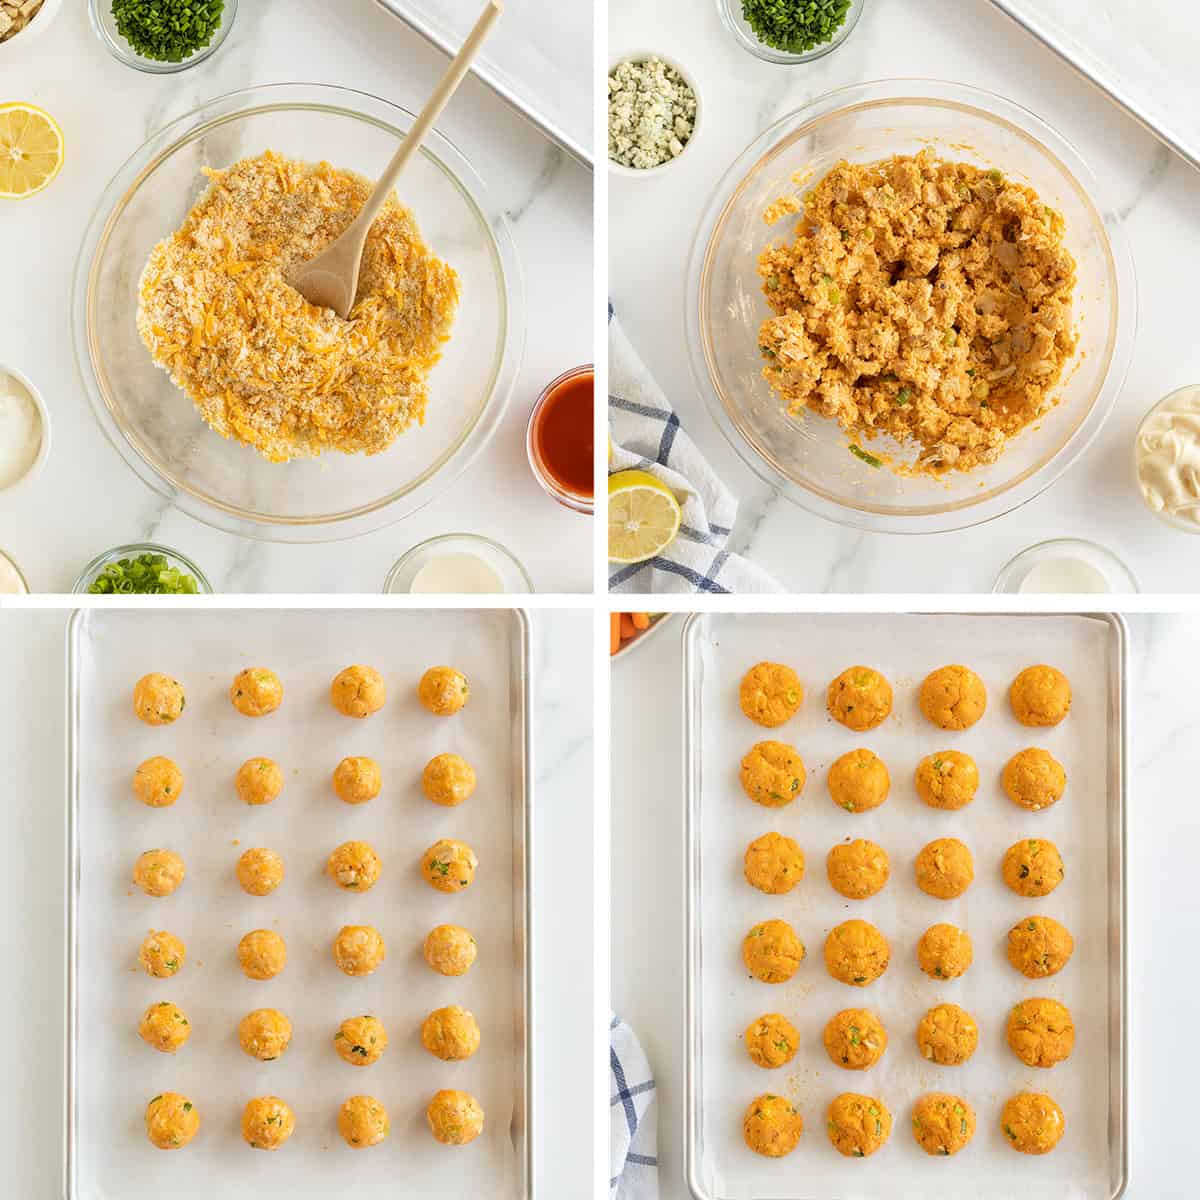 Four images showing the process of making buffalo chicken bites in a mixing bowl and on a baking sheet.